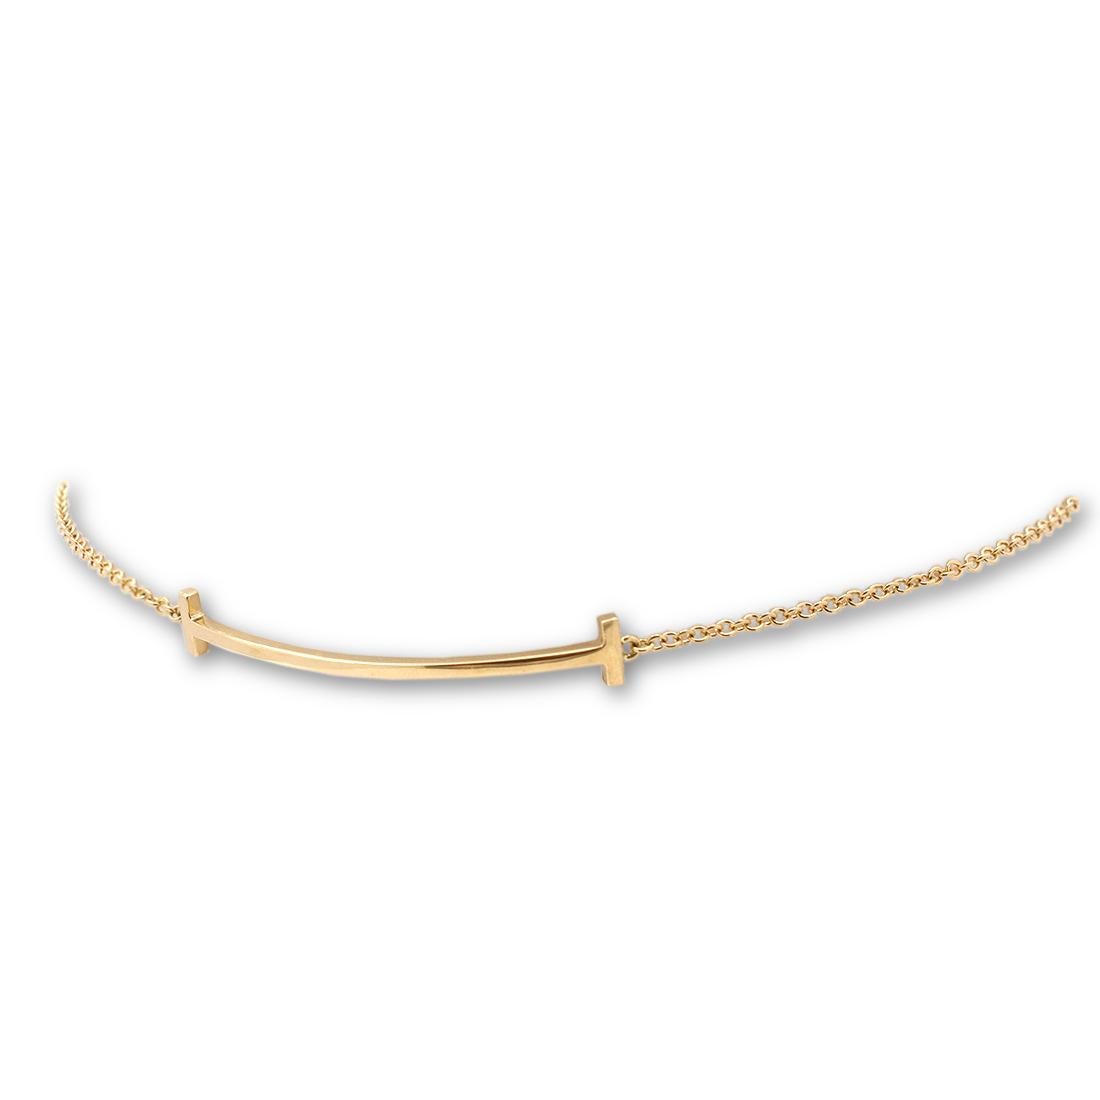 Authentic Tiffany & Co. 18 karat yellow gold 'smile' bracelet from the Tiffany T collection. A timeless design that is a tribute to the world's most universal gesture, the smile. The bracelet 6 3/4 inches in length and it will fit up to size 6.